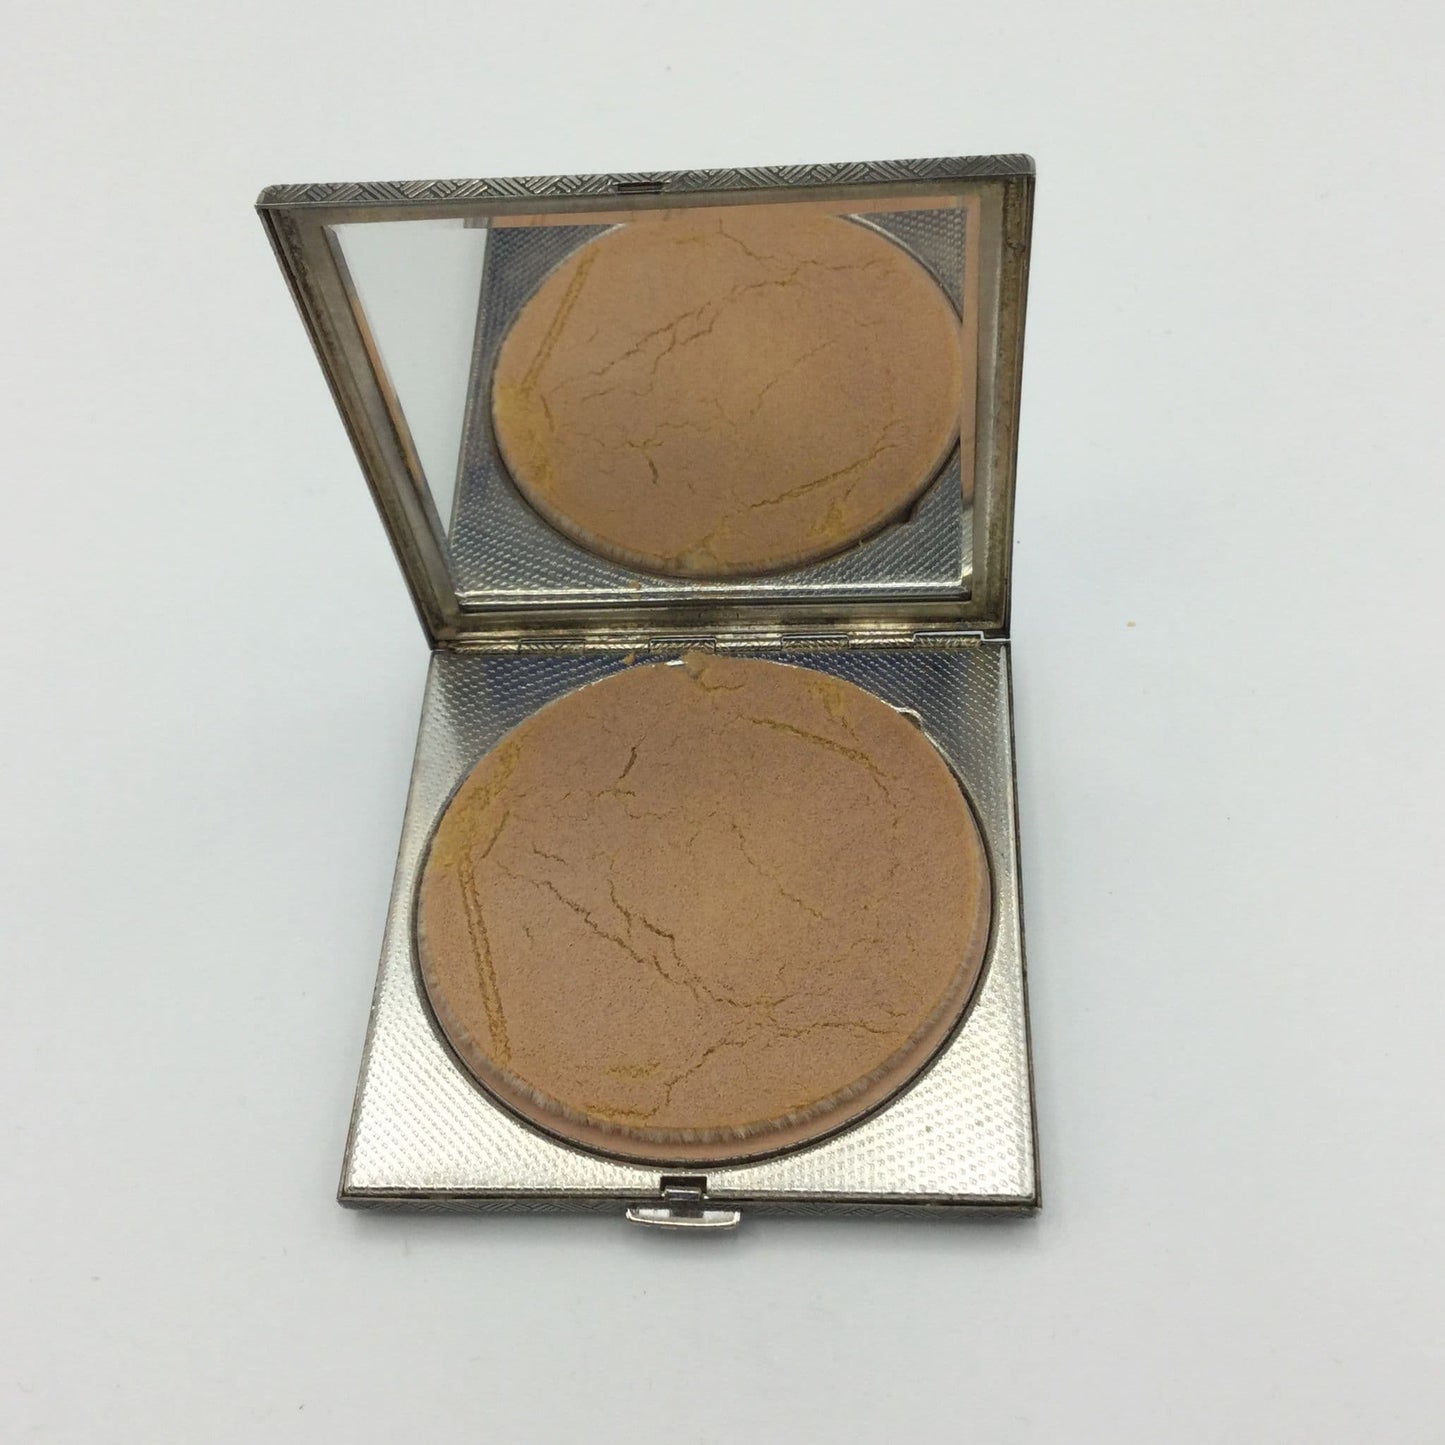 A silver coloured square compact with the lid open showing the mirror and applicator sponge